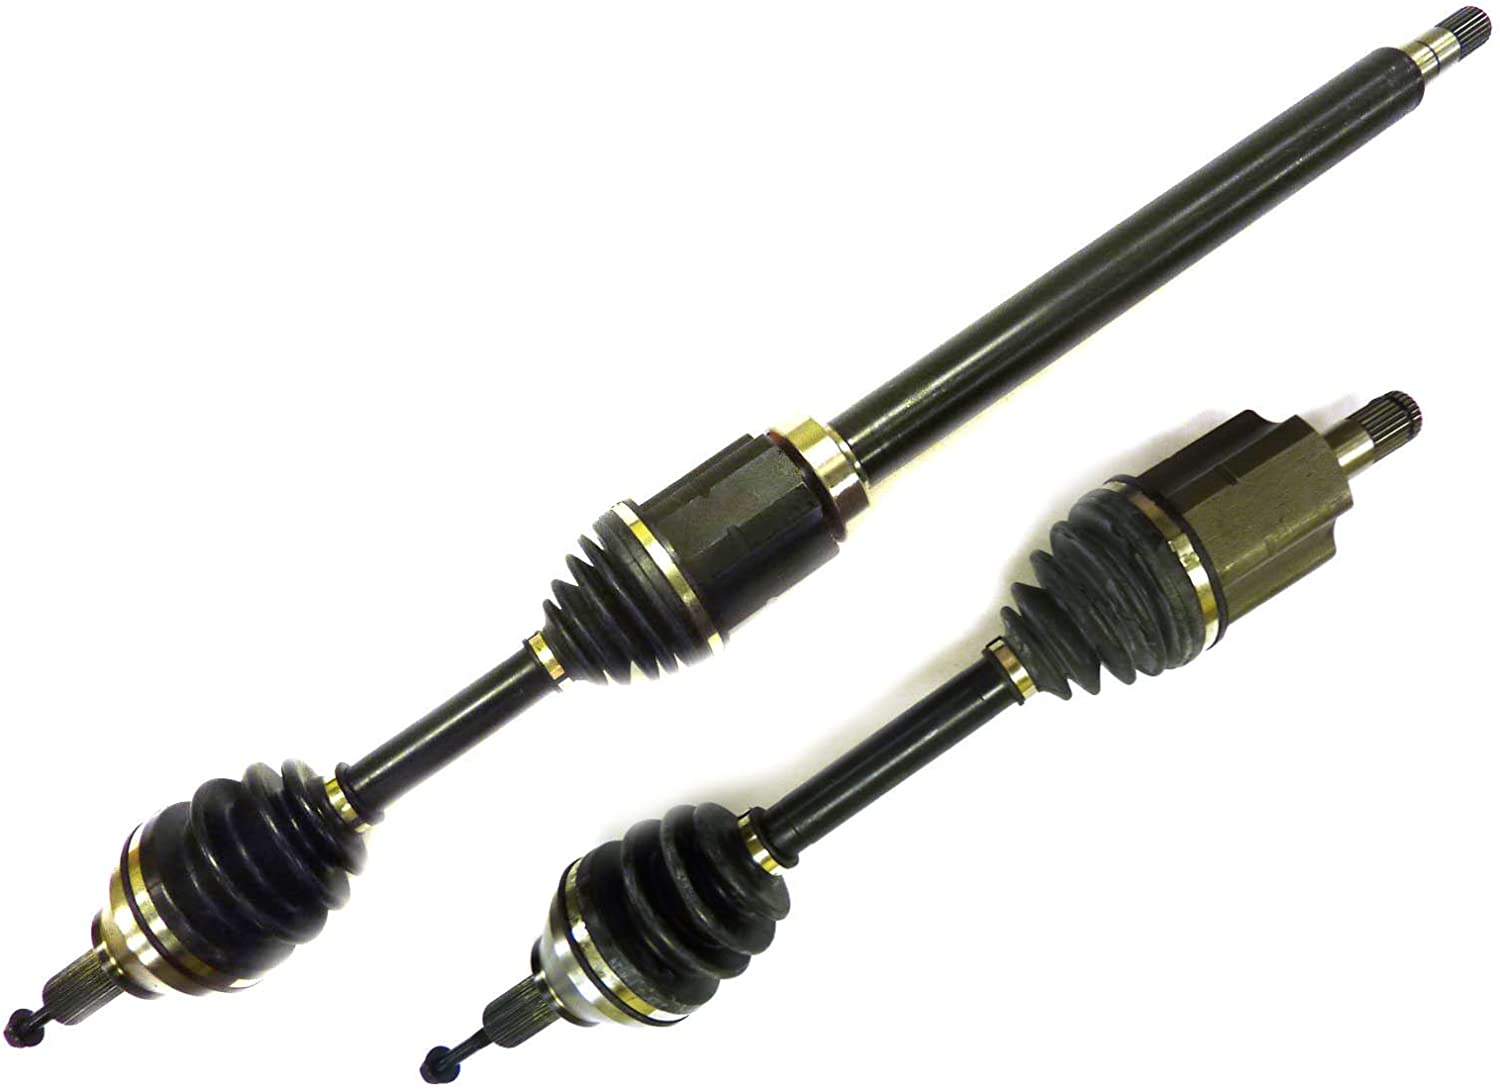 DTA DT1224722481 Front Driver and Passenger Side Premium CV Axles Fit 2005-2011 Volvo V50 FWD Automatic; 2006-2012 C70 FWD Automatic; 2004-2010 S40 FWD Automatic